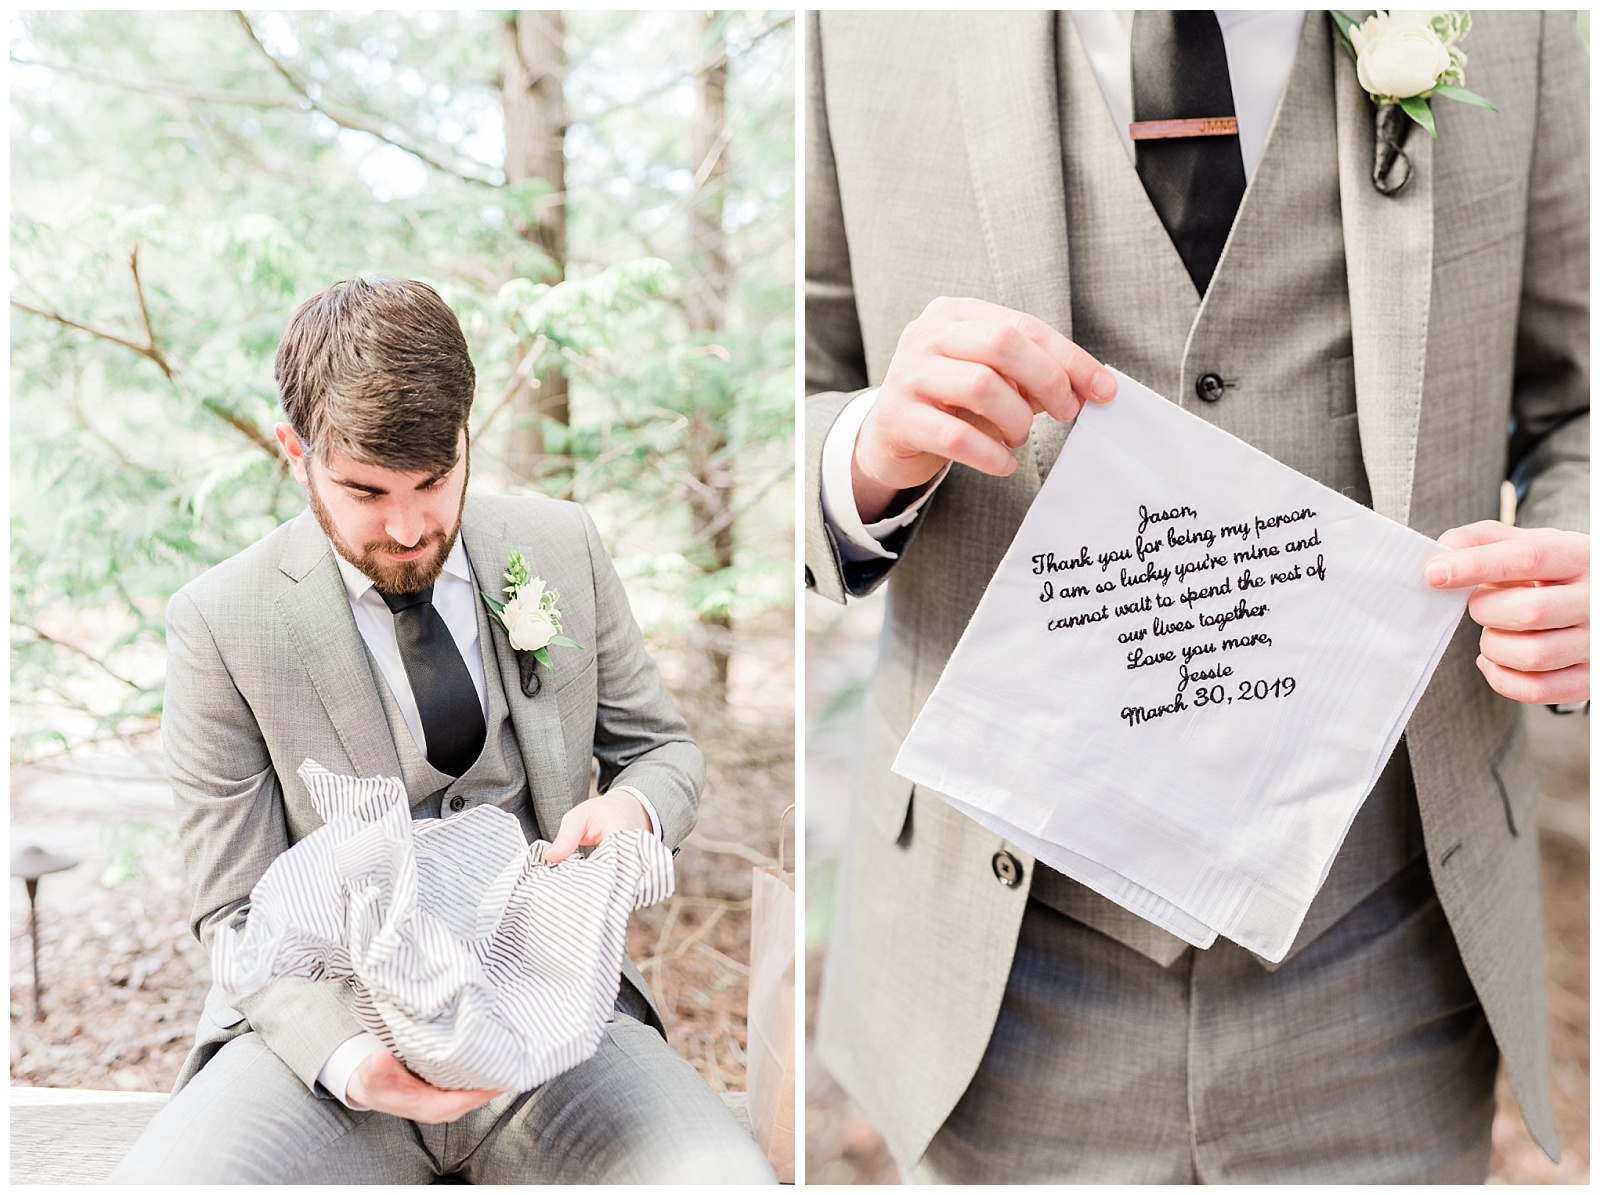 Groom opens gift from the bride, showing an embroidered handkerchief with a love note.